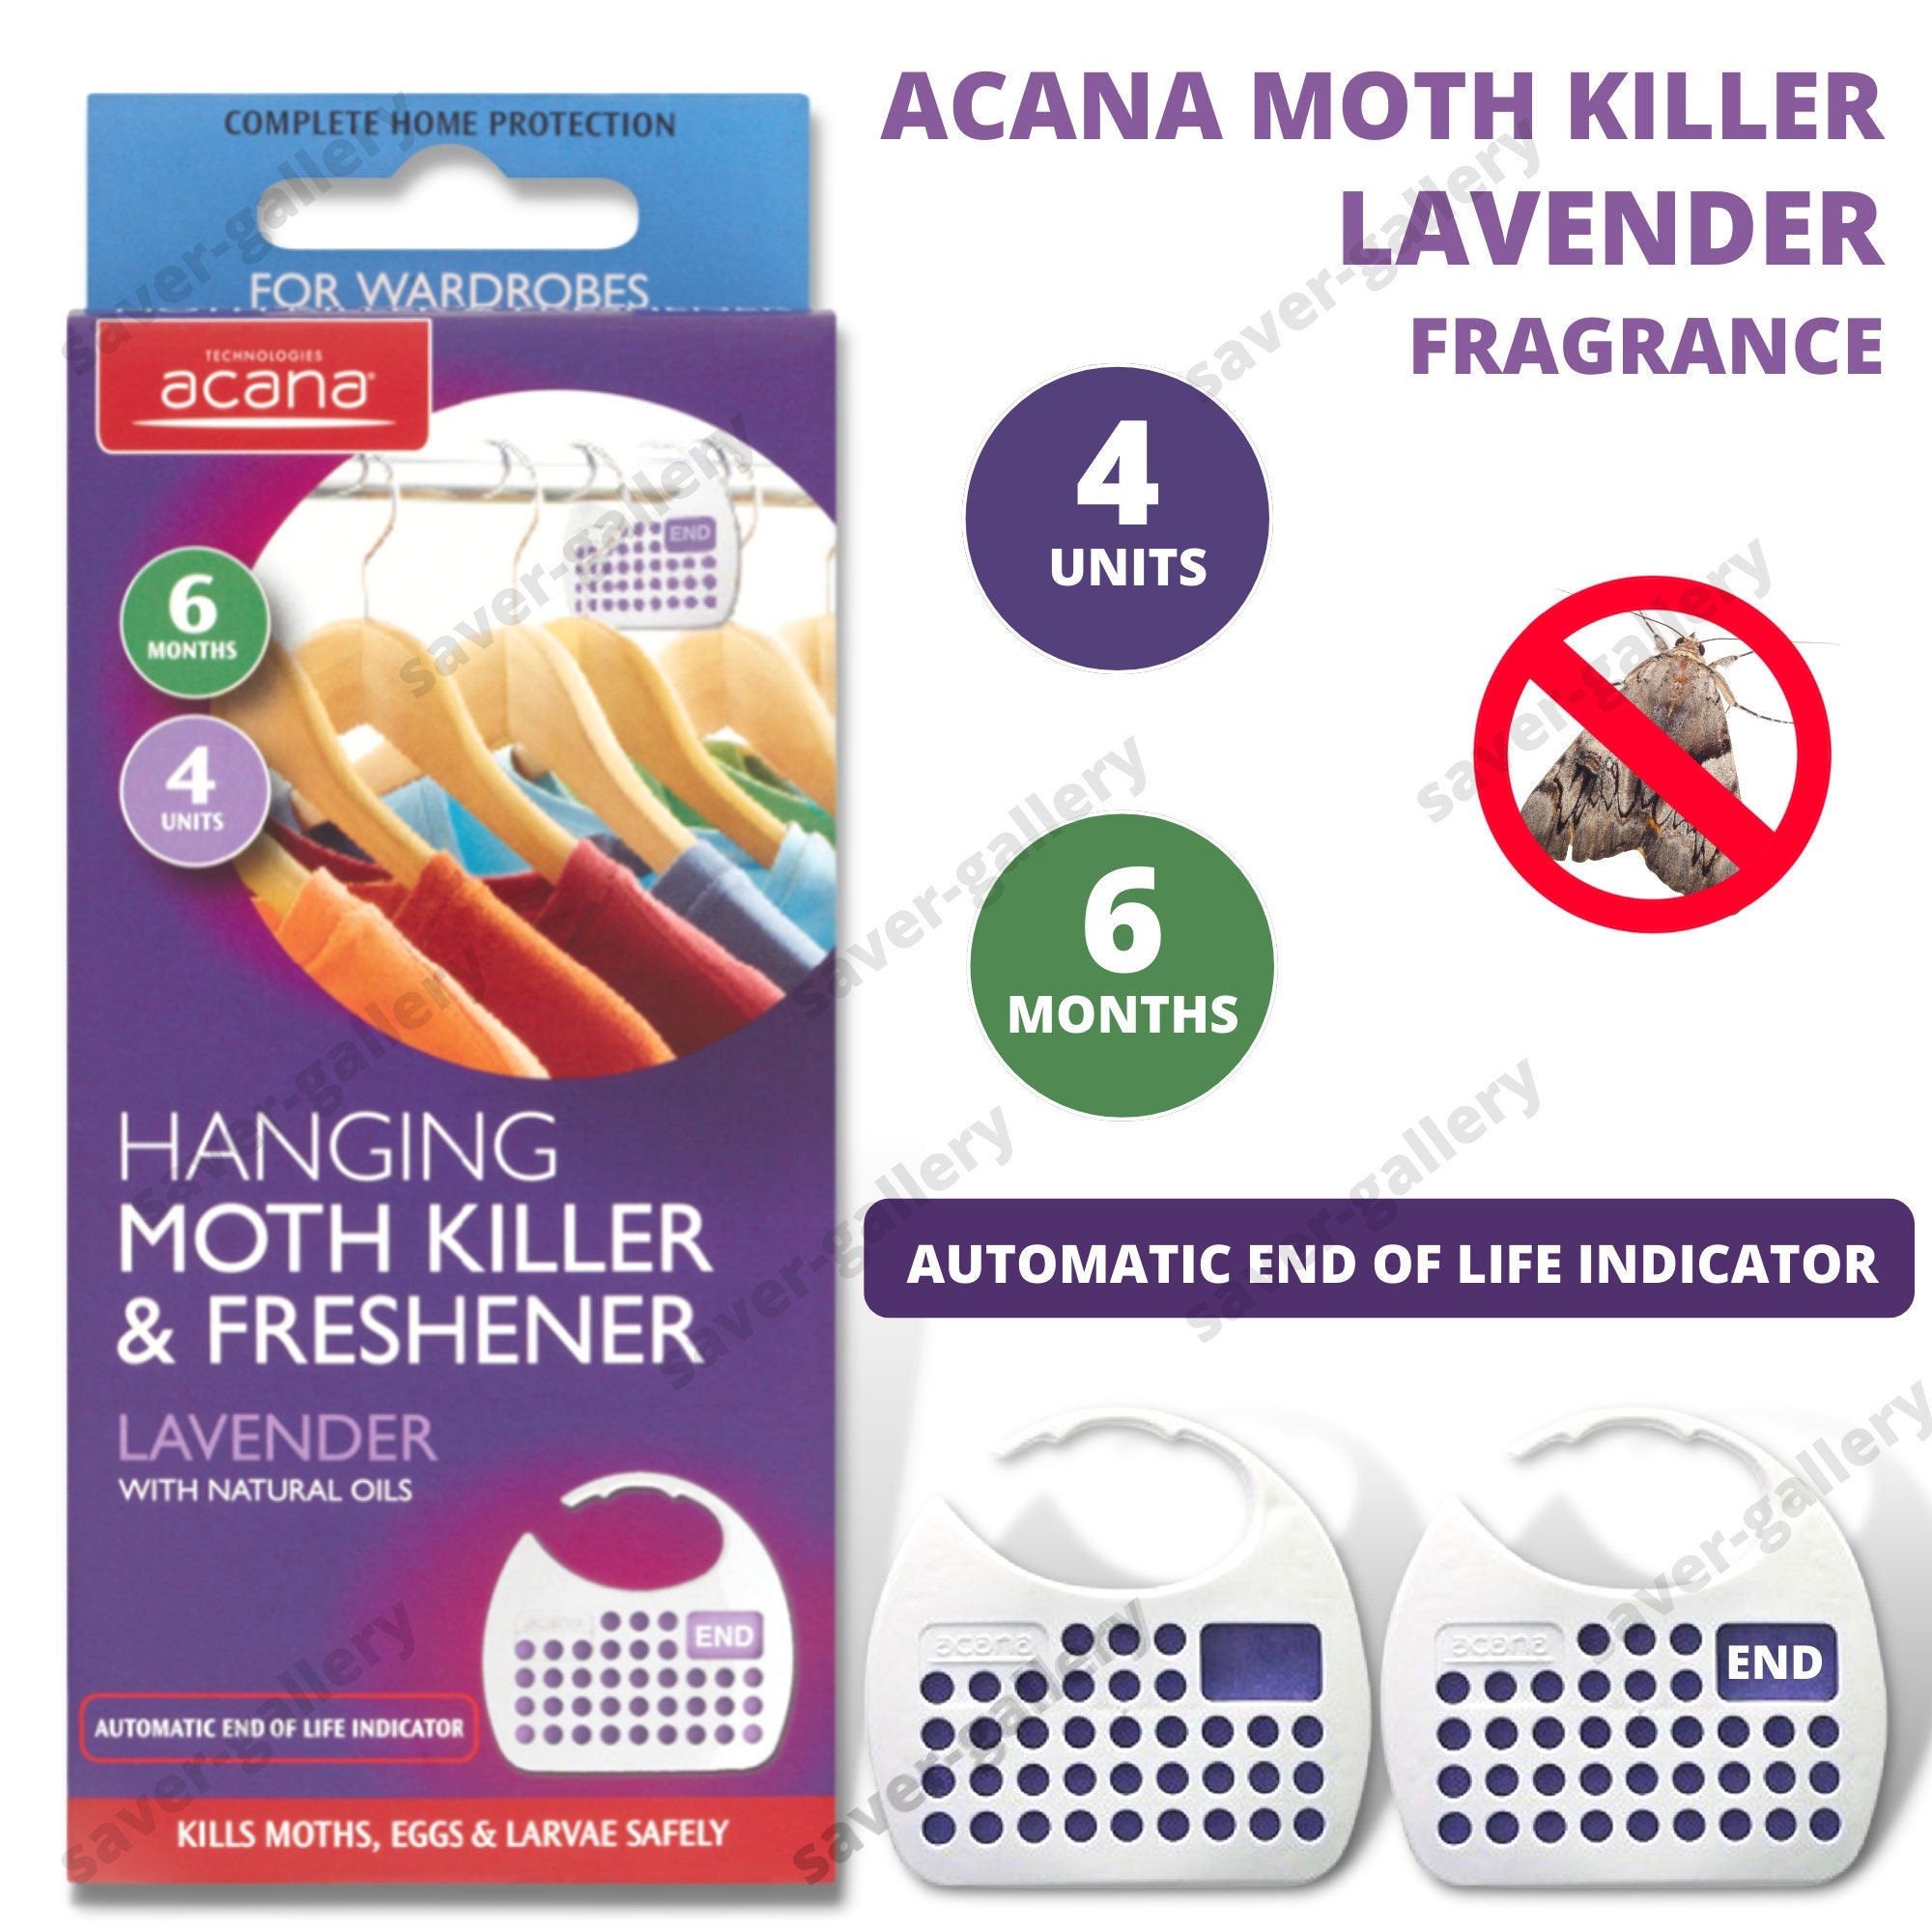 20 Acana Moth Repellent Sachets With Lavender Scent Wardrobes Clothes  Drawers